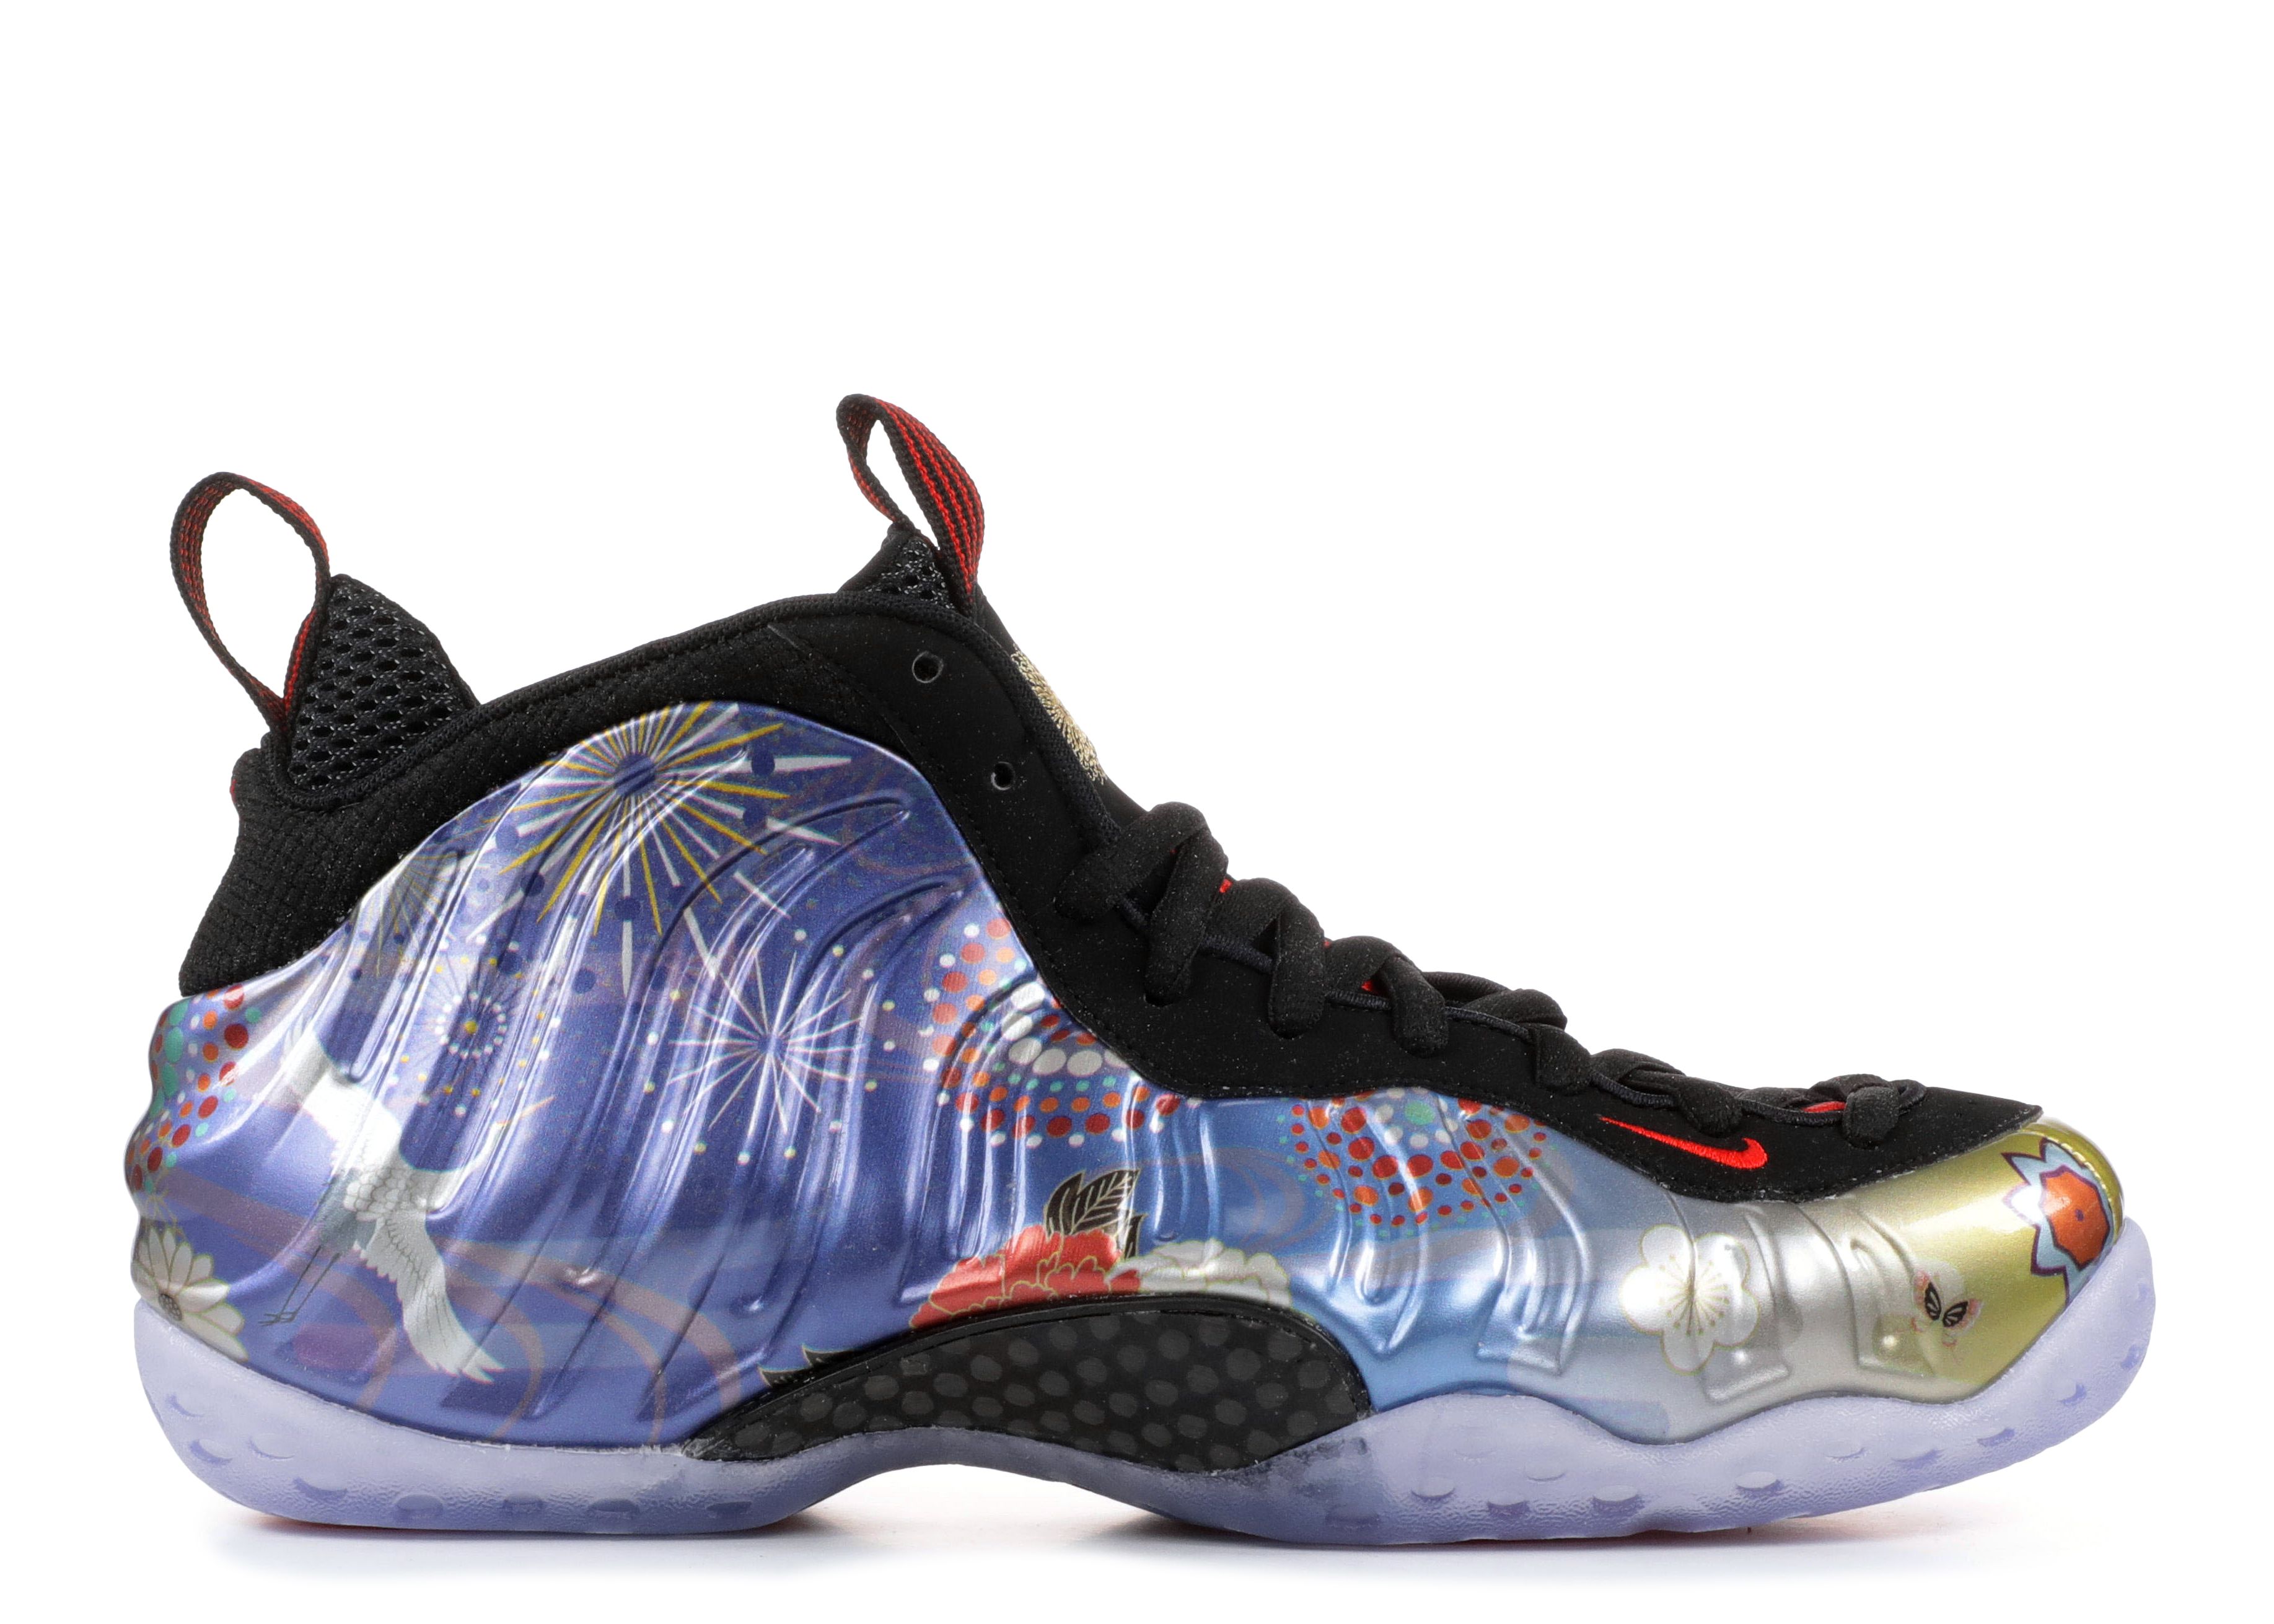 The Nike Air Foamposite One Blue Mirror Has A Release Date